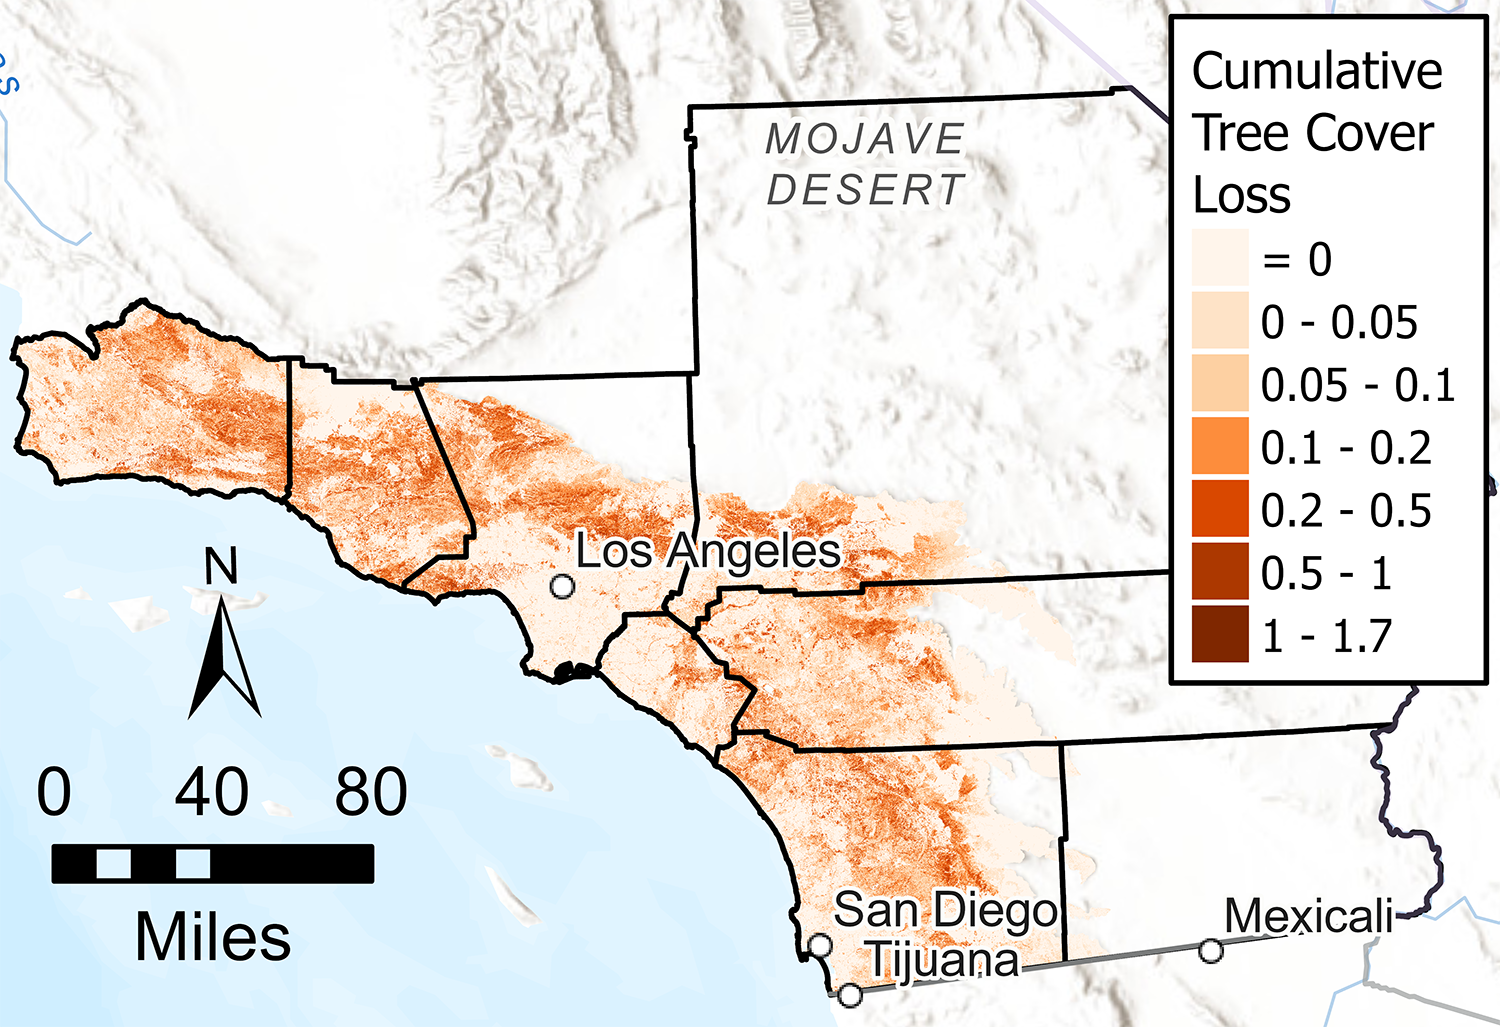 Chart of Cumulative Tree Cover Loss on Map of Southern California